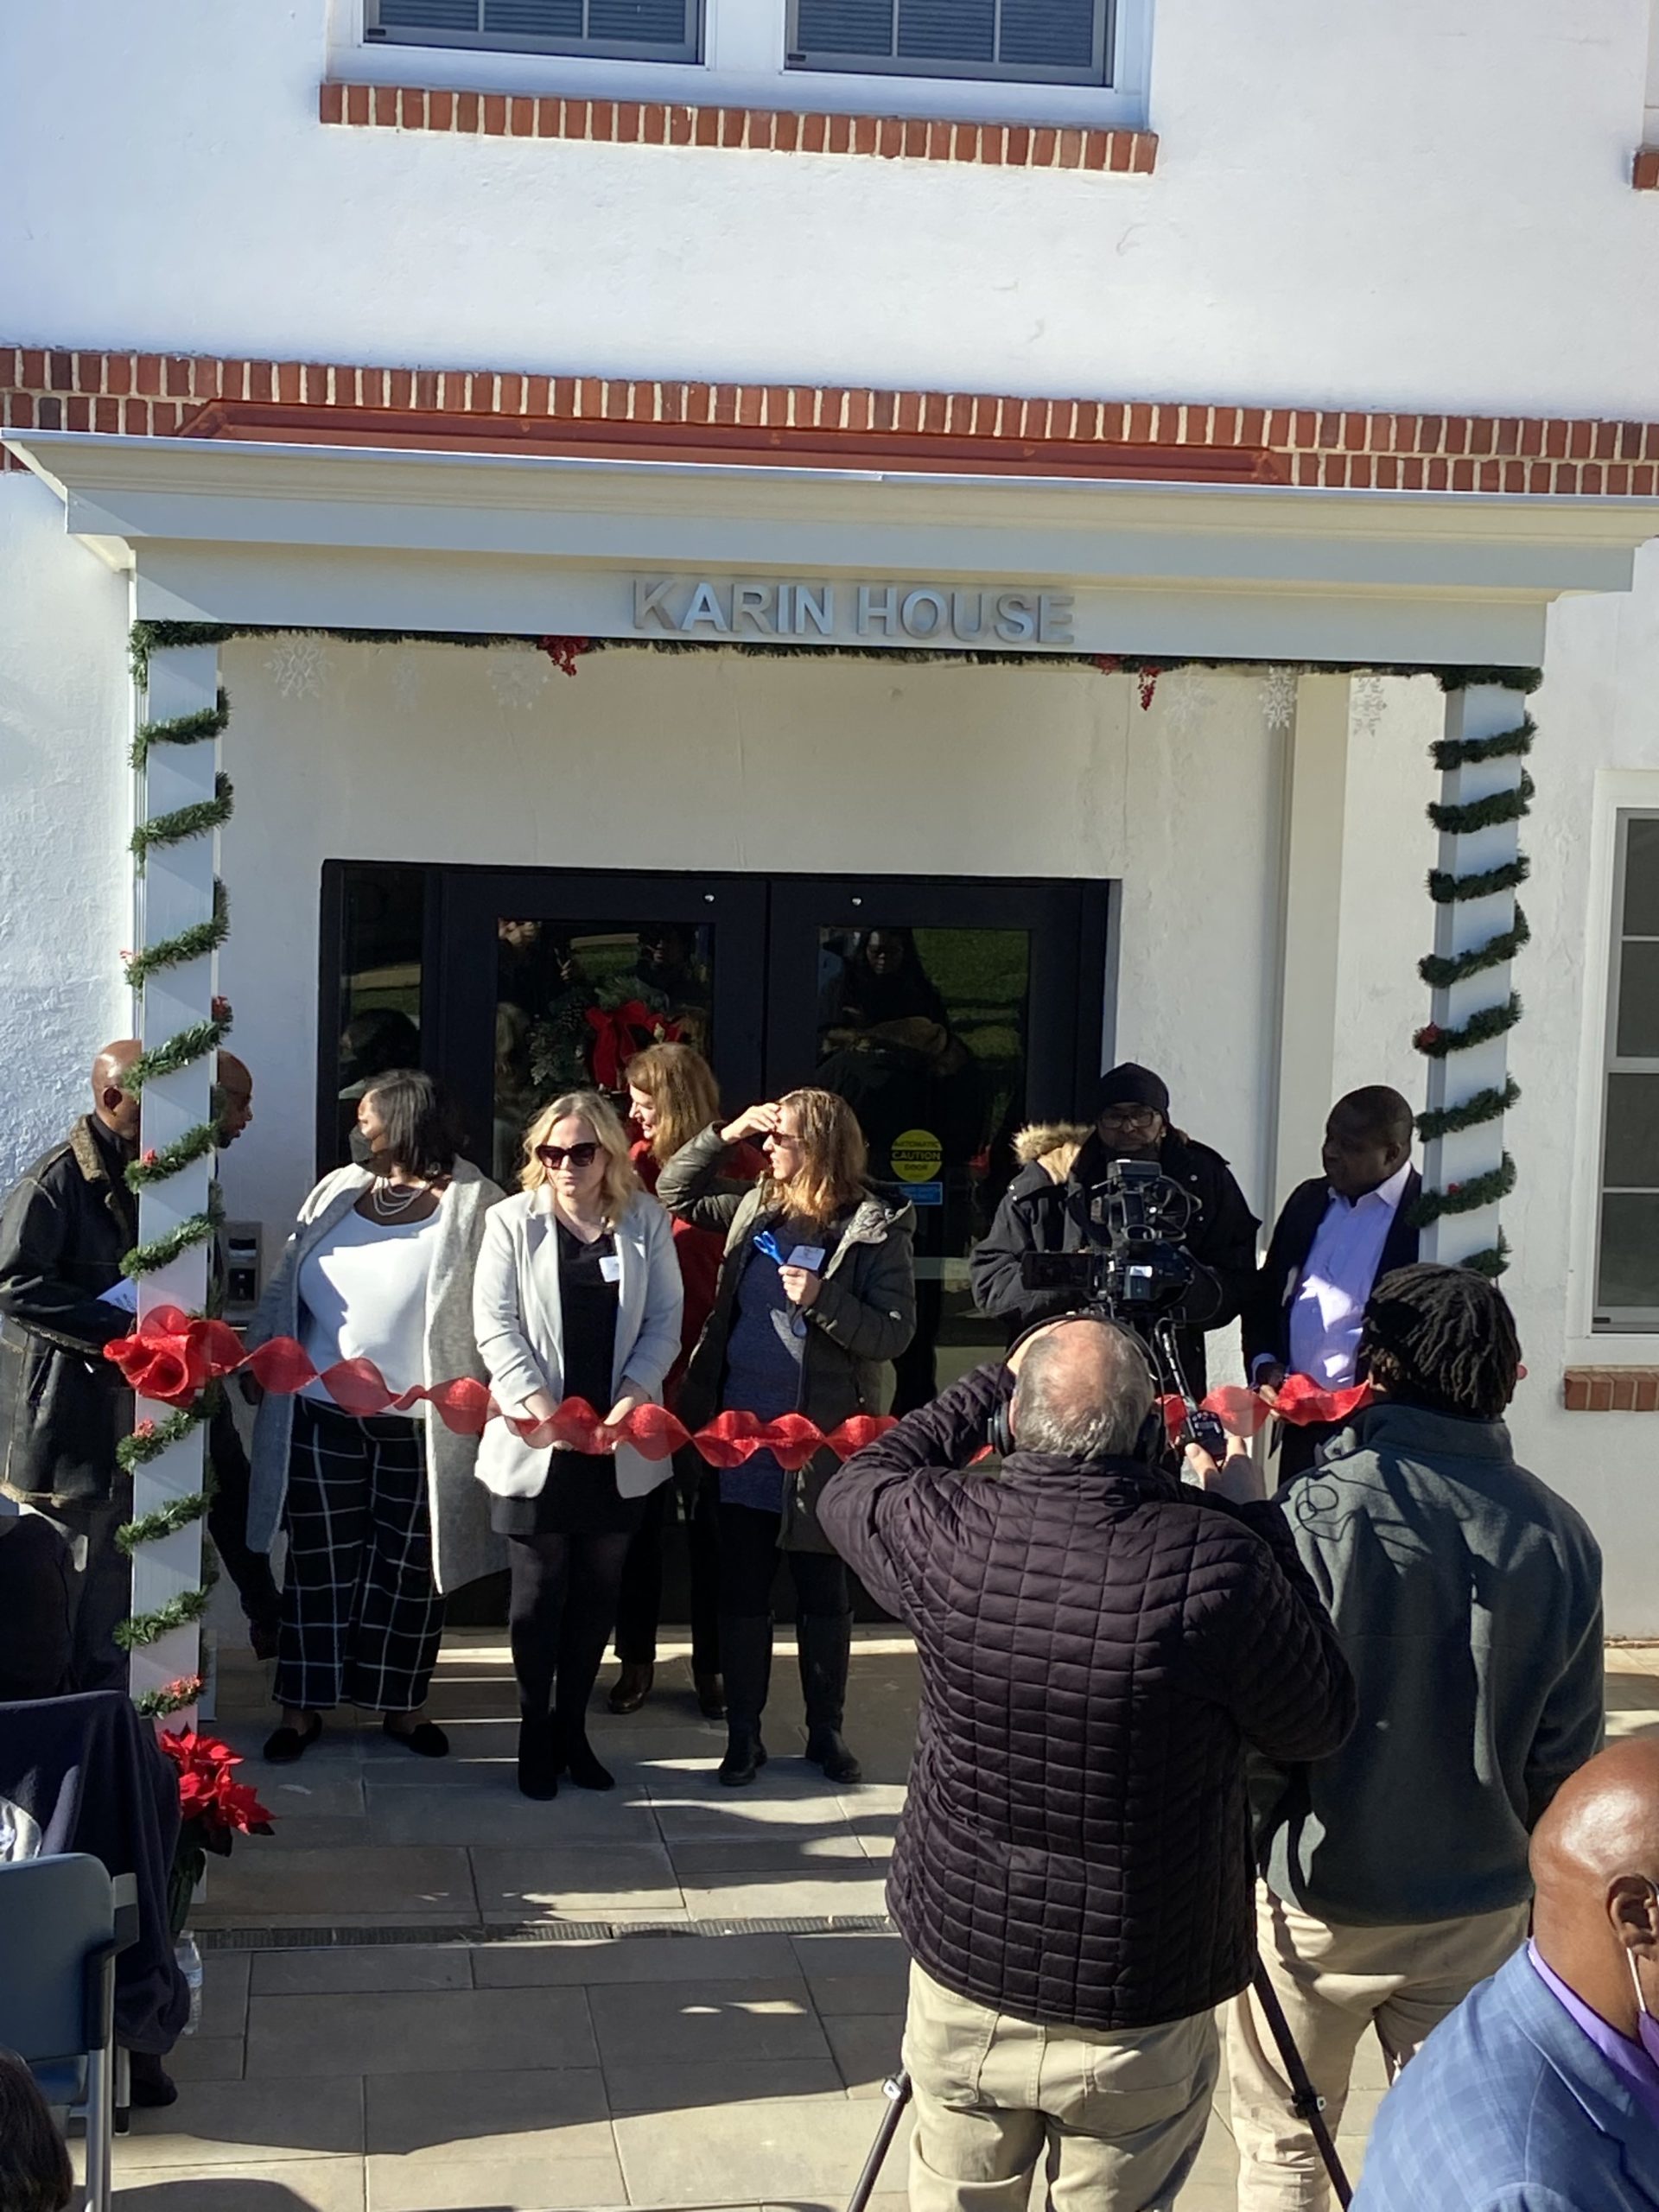 KH entry and Ribbon cutting